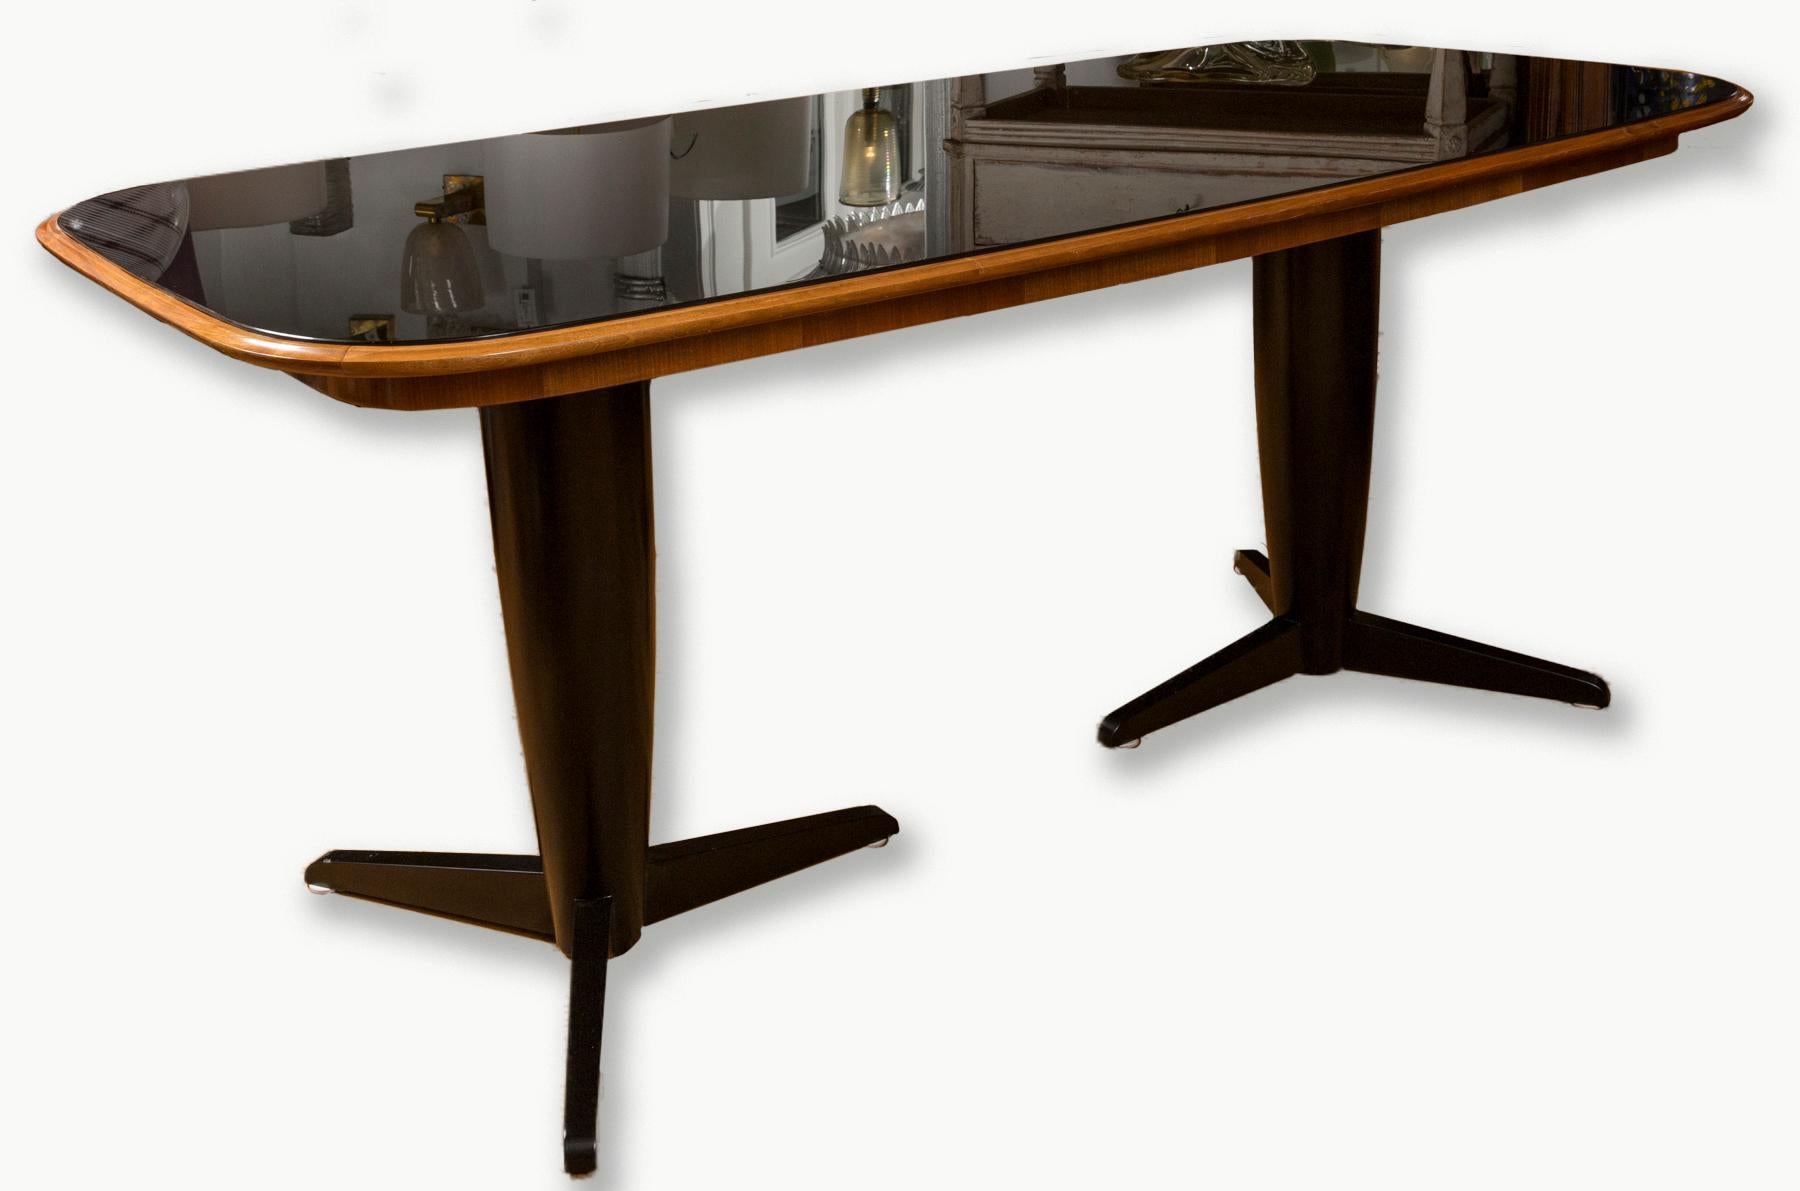 An elegant tapered and curving  rectangular shaped plateau in walnut with inset black glass  above complimenting   matte black lacquered and tapered double pedestal base on tripod feet.
Extremely solid and heavy table base 
Origin: Italy
Dating